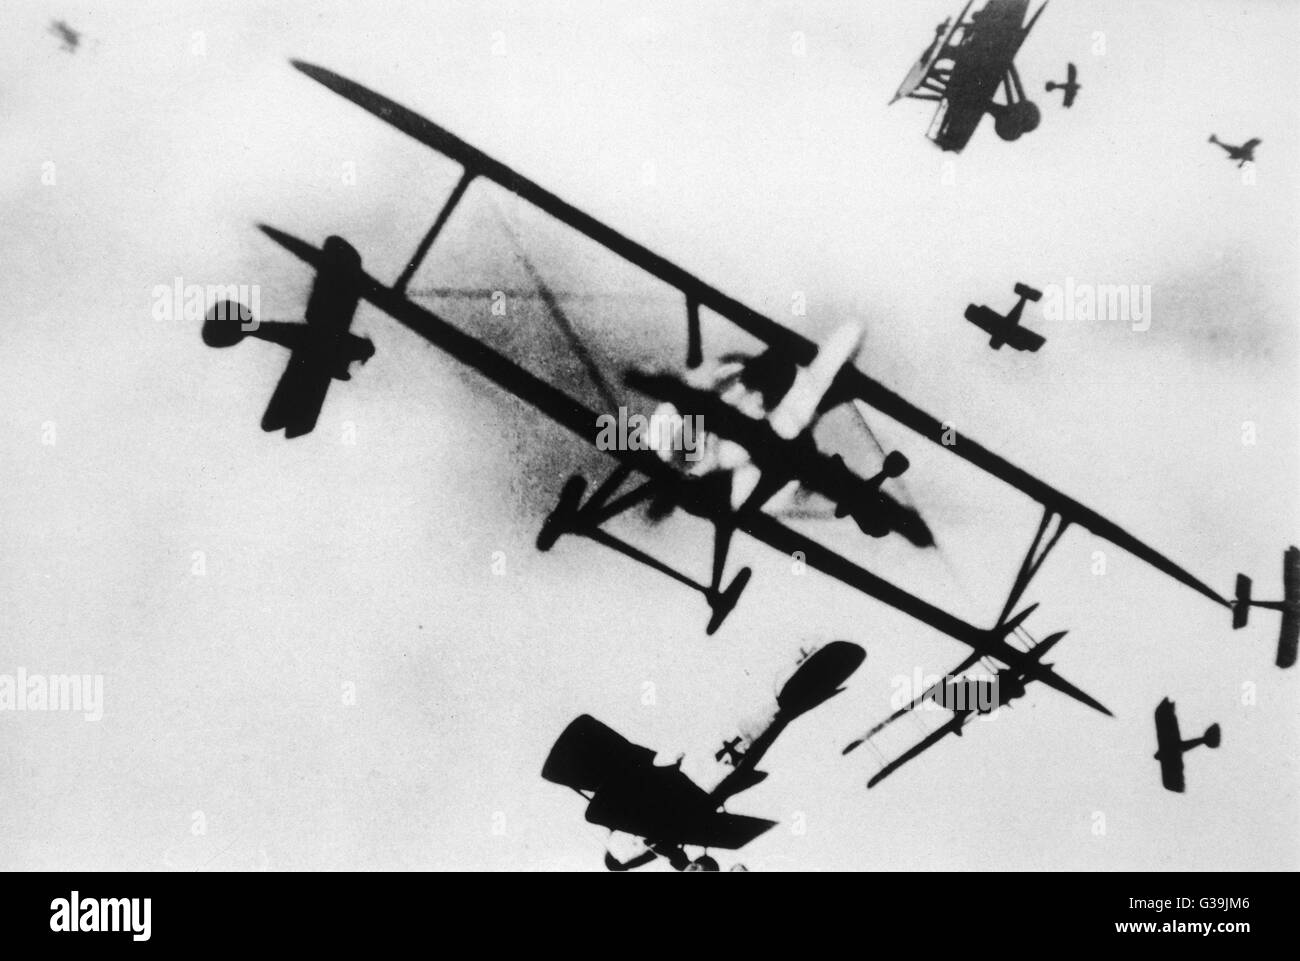 Many bi-planes, silhouetted  against the sky, take part in  an aerial dogfight.  This image was one of a series of faked photographs which caused a sensation on publication in 1933. They accompanied the apparent diary of a World War One British pilot. Pre Stock Photo